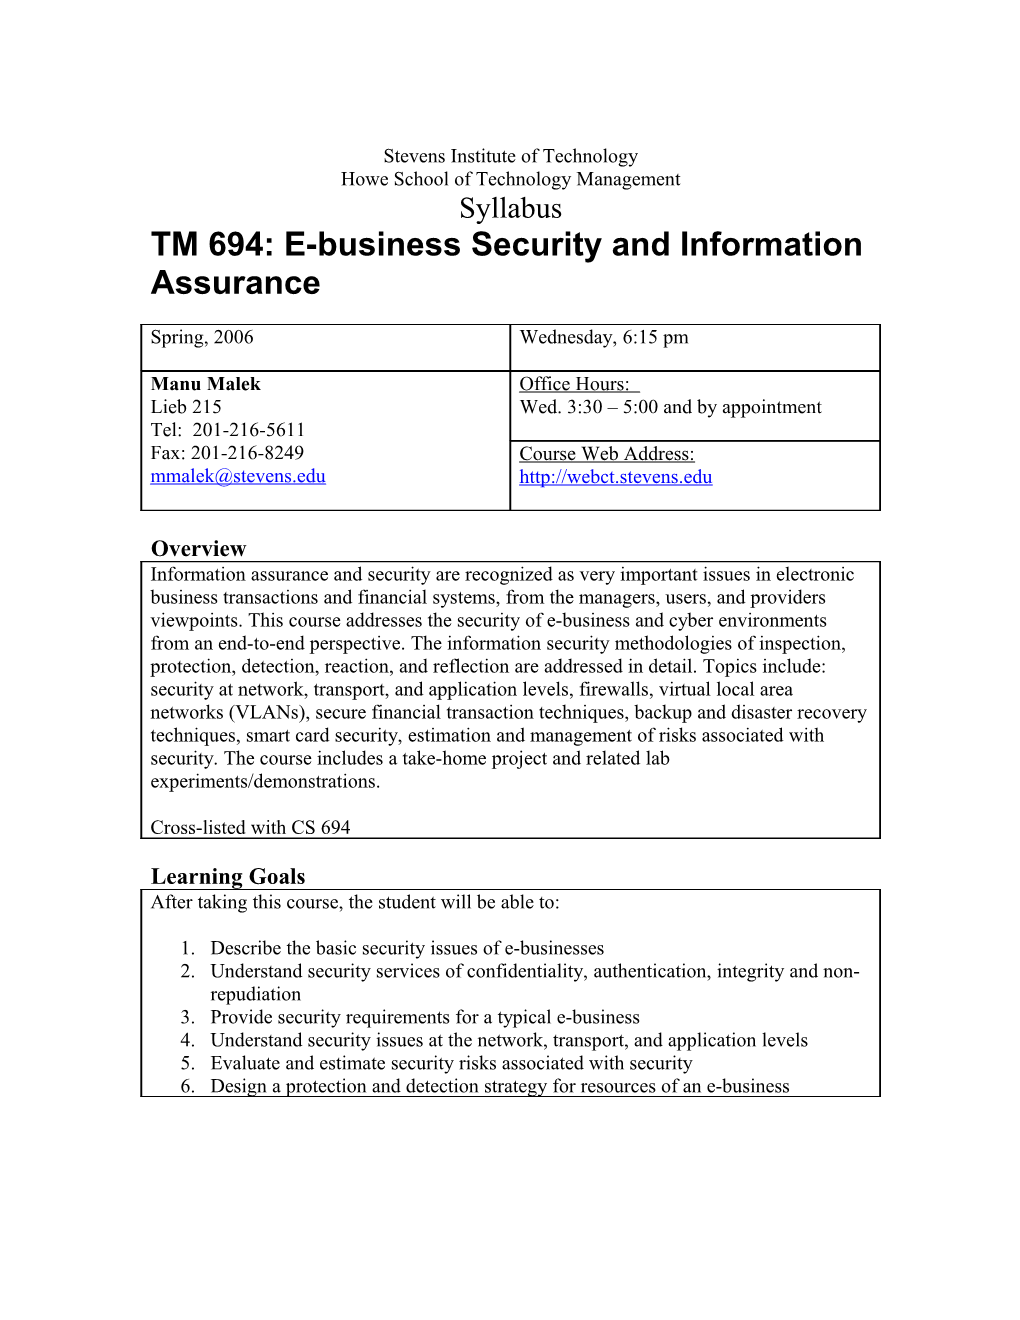 TM 694: E-Business Security and Information Assurance